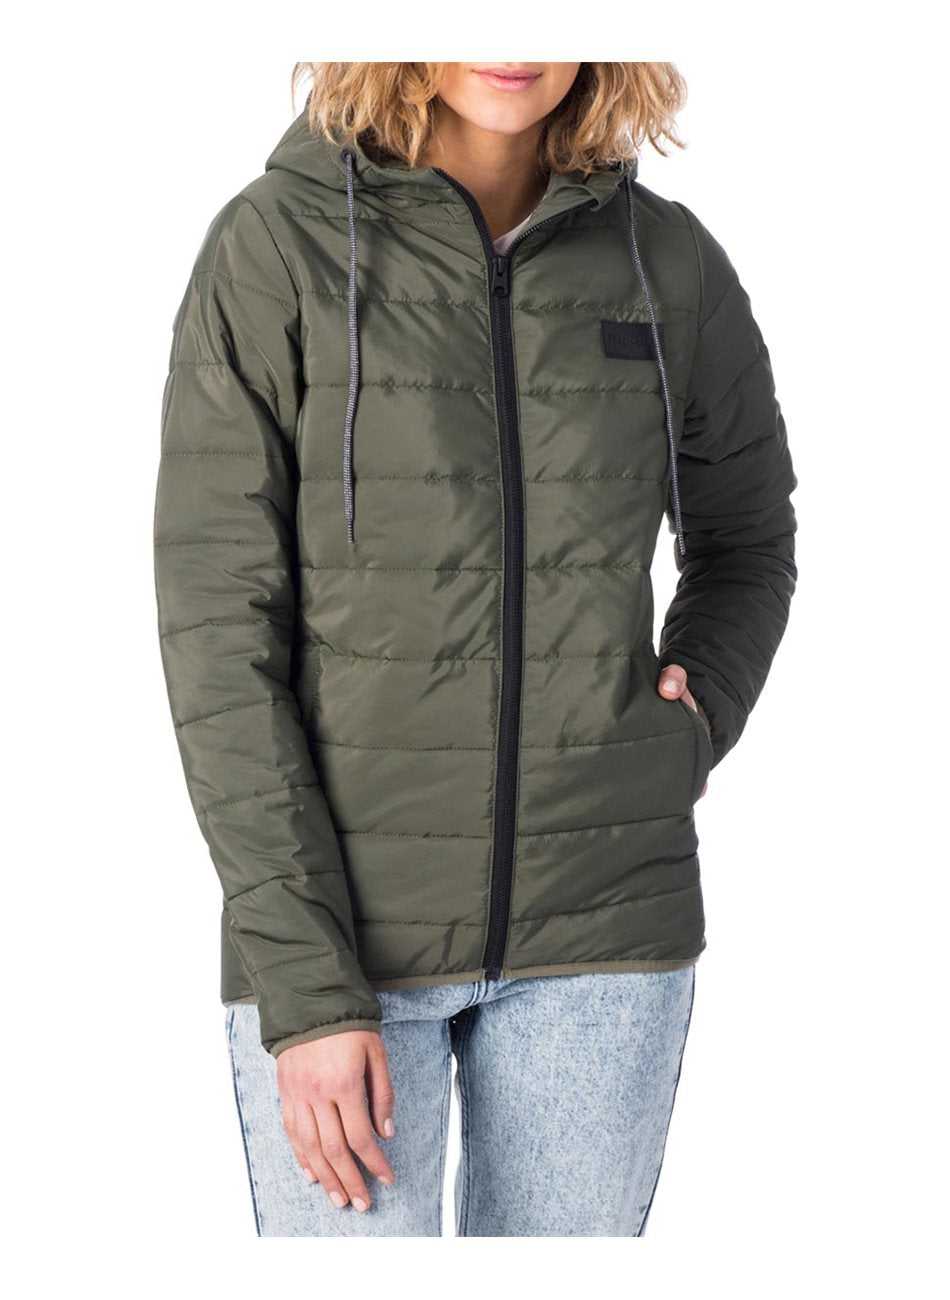 THE SEARCH PUFFER JACKET